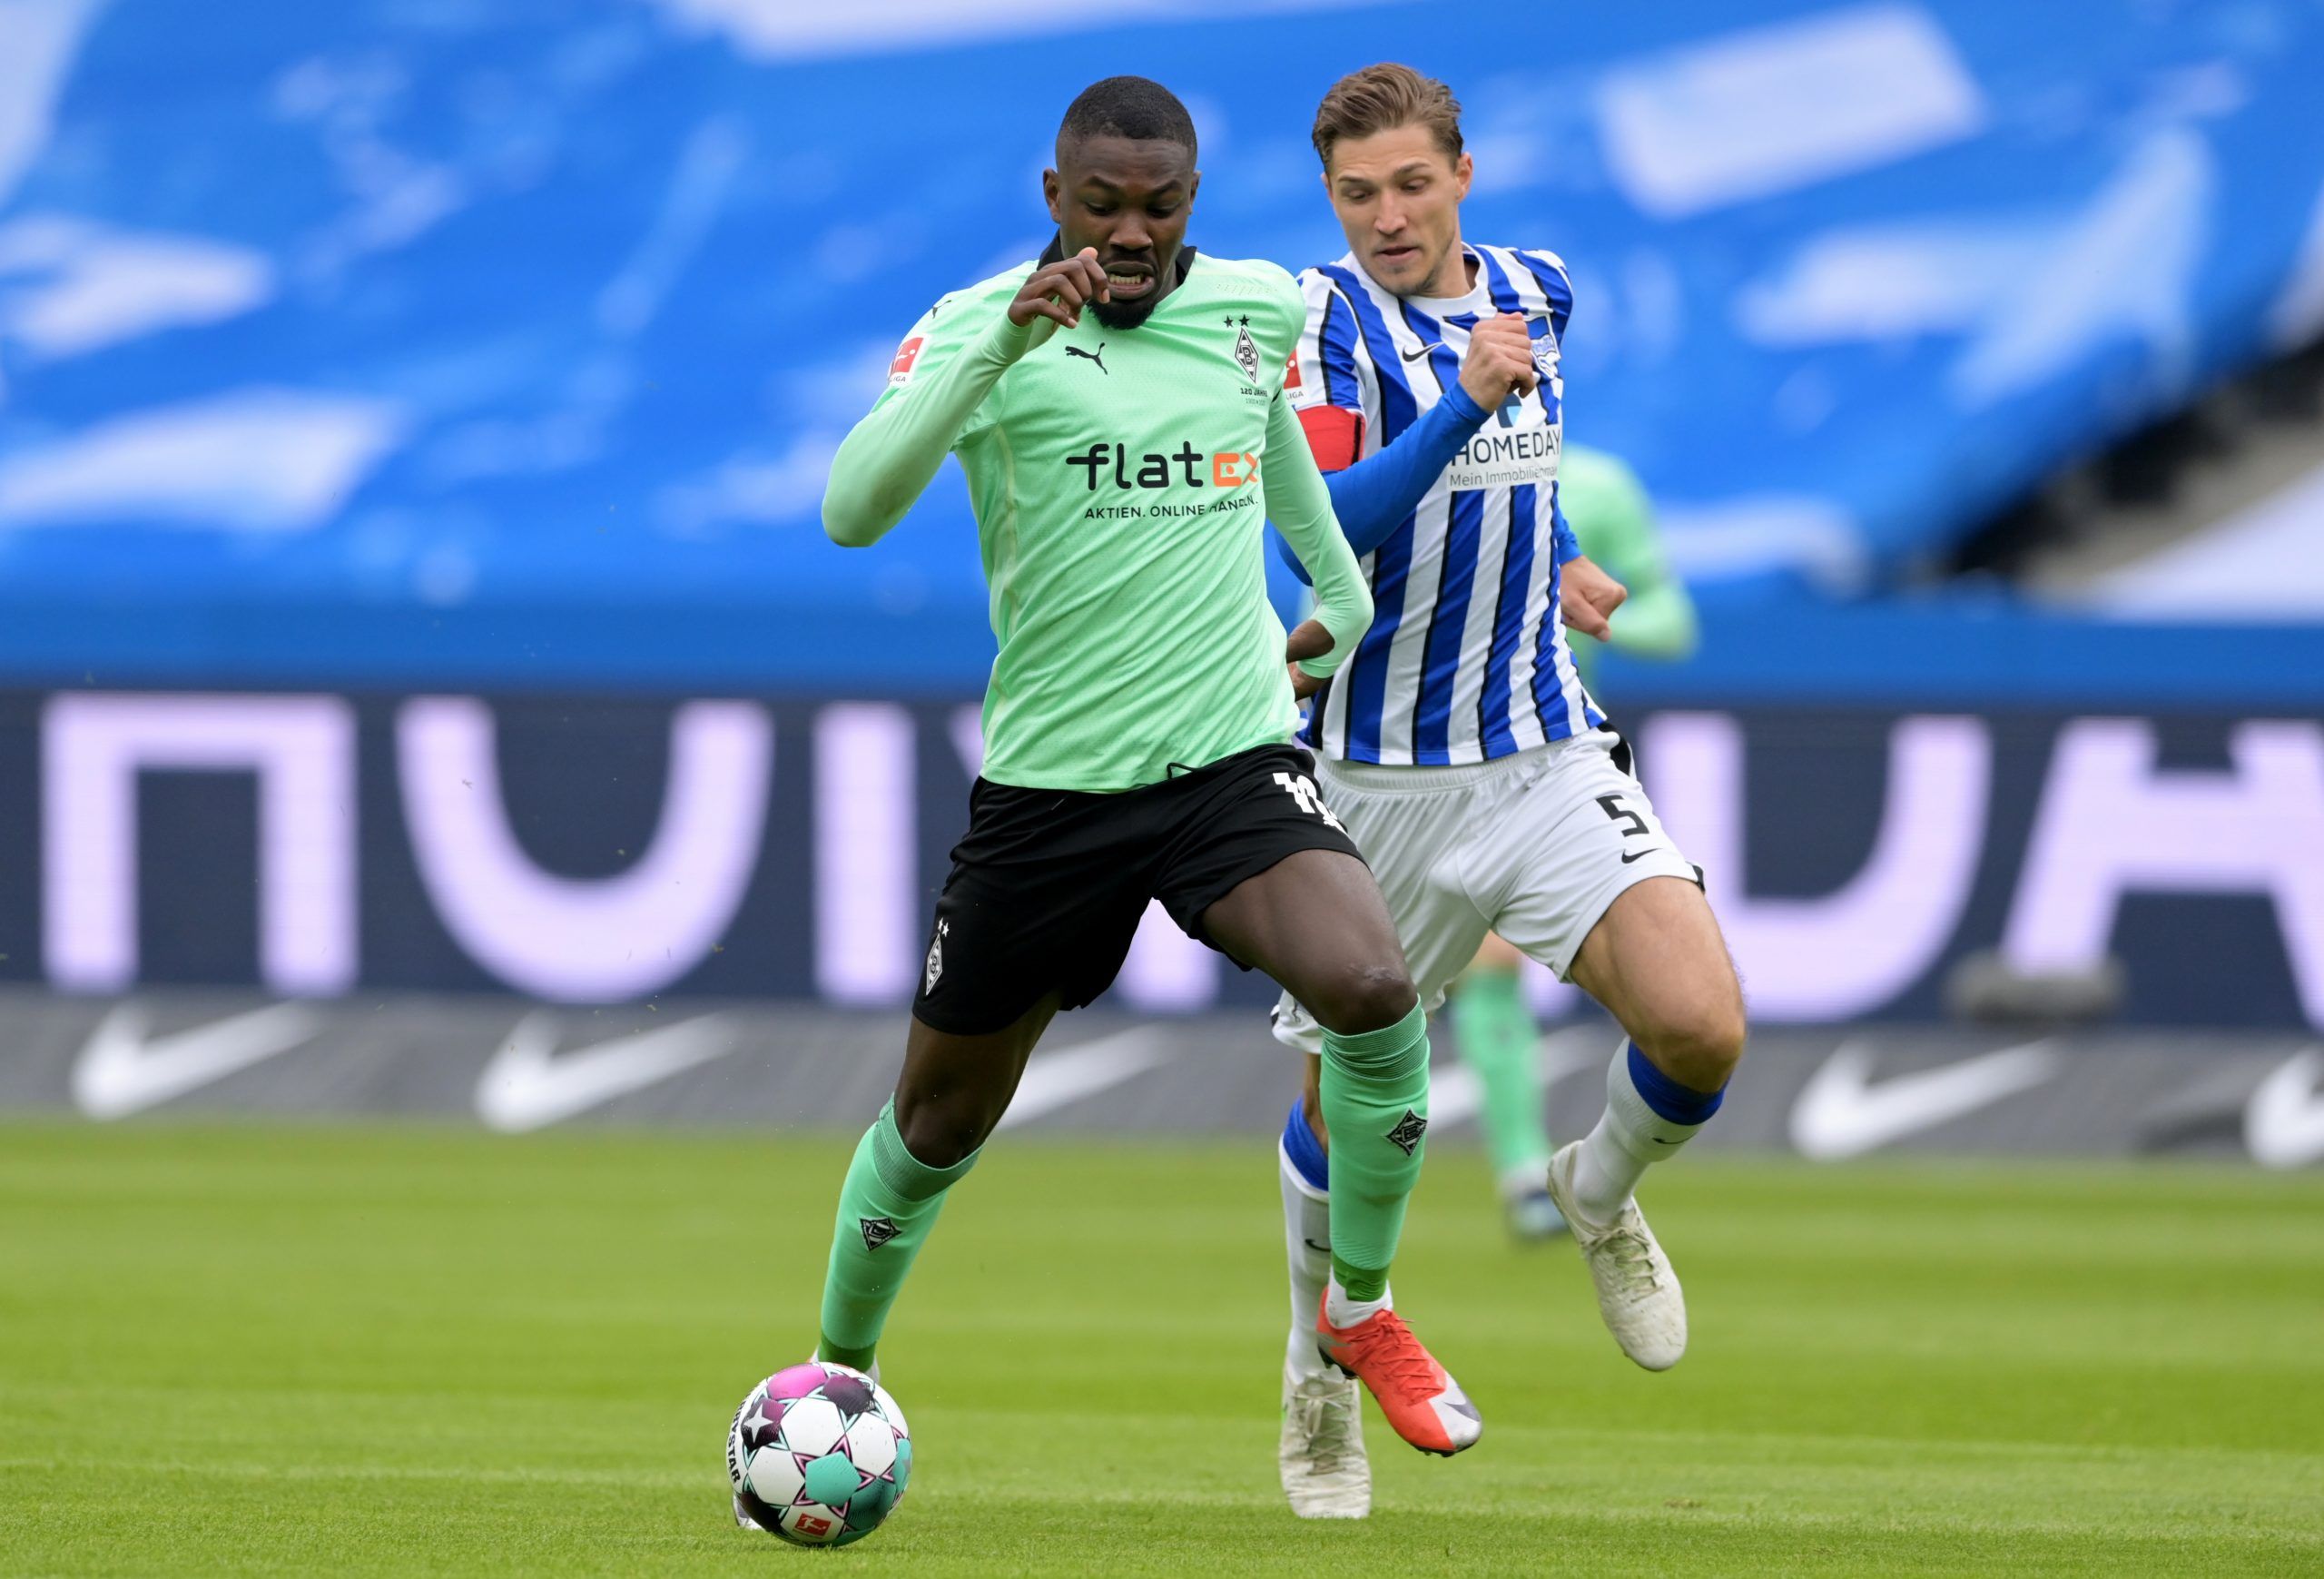 Soccer Football - Bundesliga - Hertha BSC v Borussia Moenchengladbach - Olympiastadion, Berlin, Germany - April 10, 2021 Borussia Moenchengladbach's Marcus Thuram in action with Hertha BSC's Niklas Stark Pool via REUTERS/Soeren Stache DFL regulations prohibit any use of photographs as image sequences and/or quasi-video.